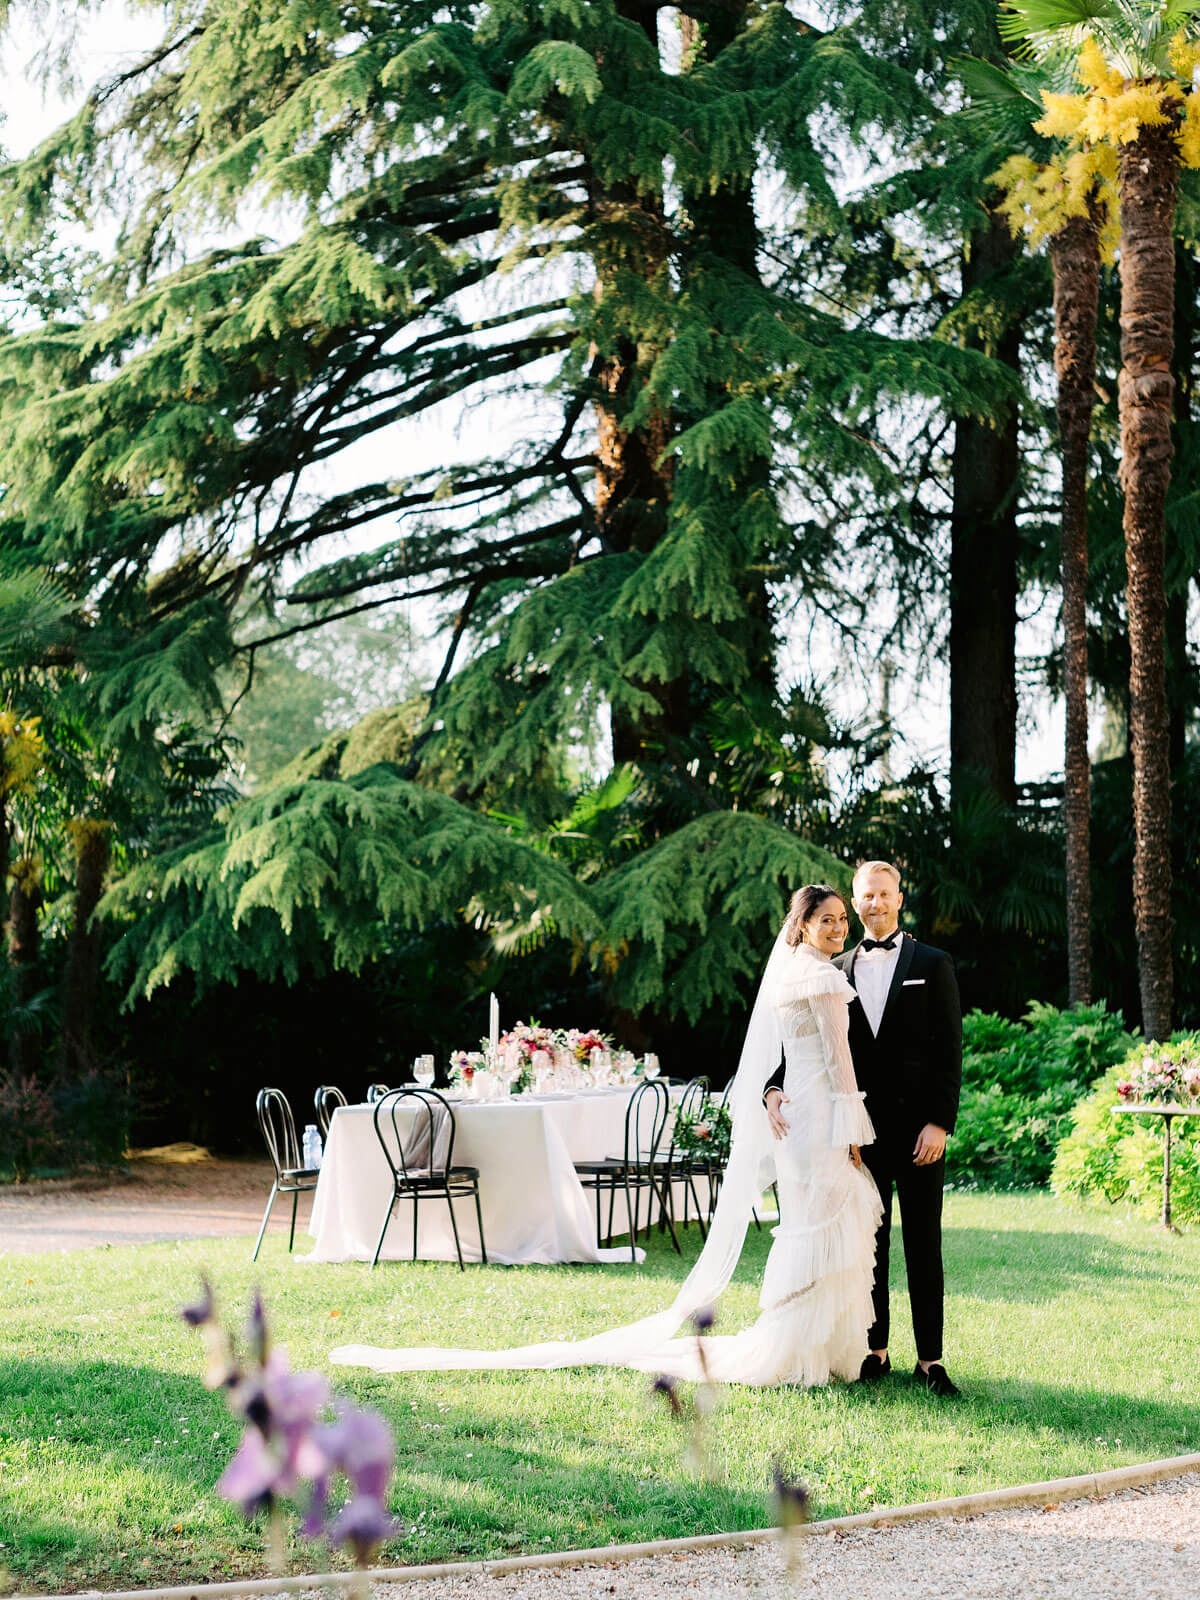 The bride and groom are standing in a garden with a long dining table and large trees in the background.